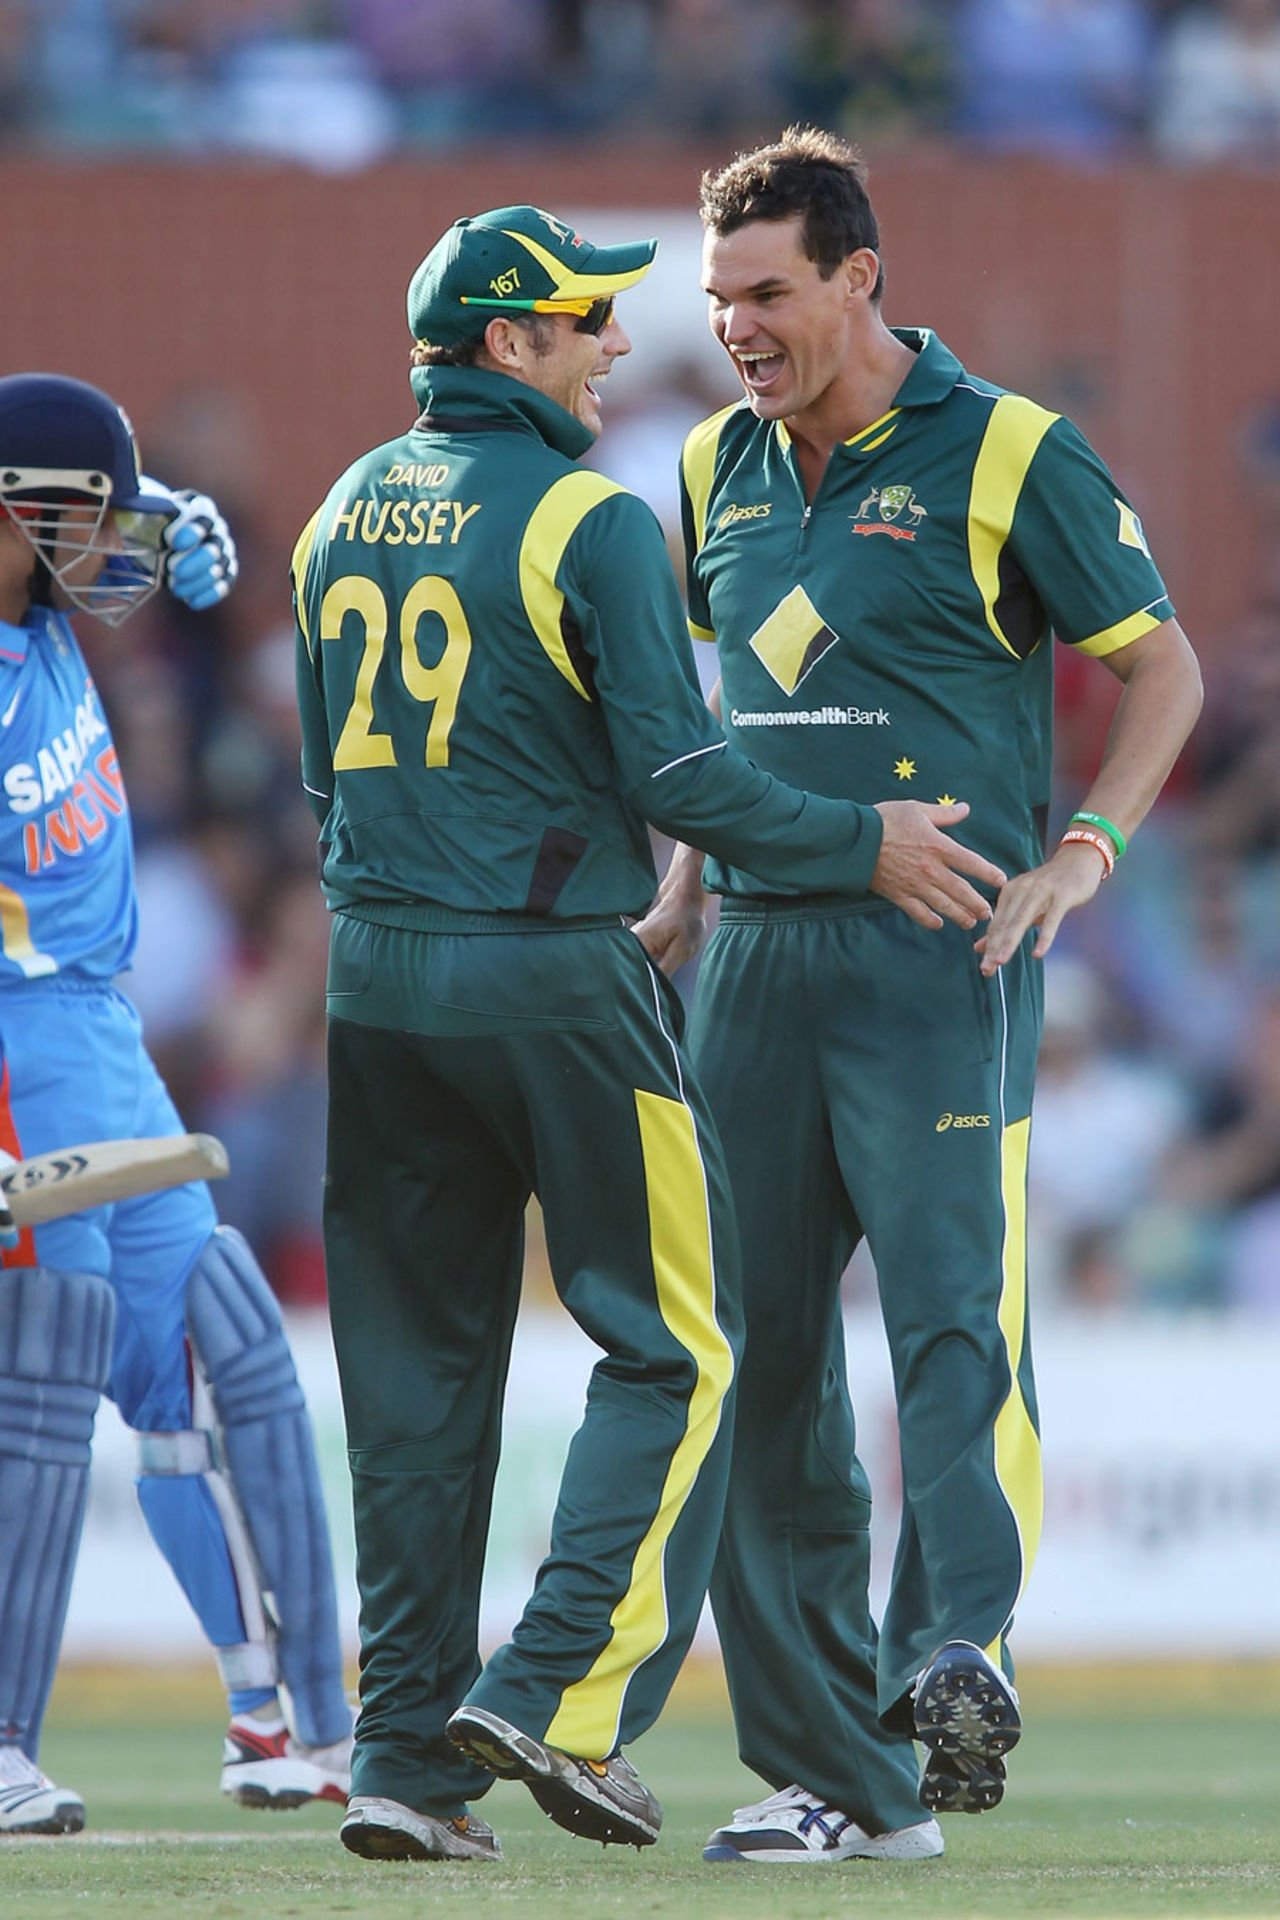 Clint McKay struck twice with the first ball of a spell, Australia v India, Commonwealth Bank Series, Adelaide, February 12, 2012
